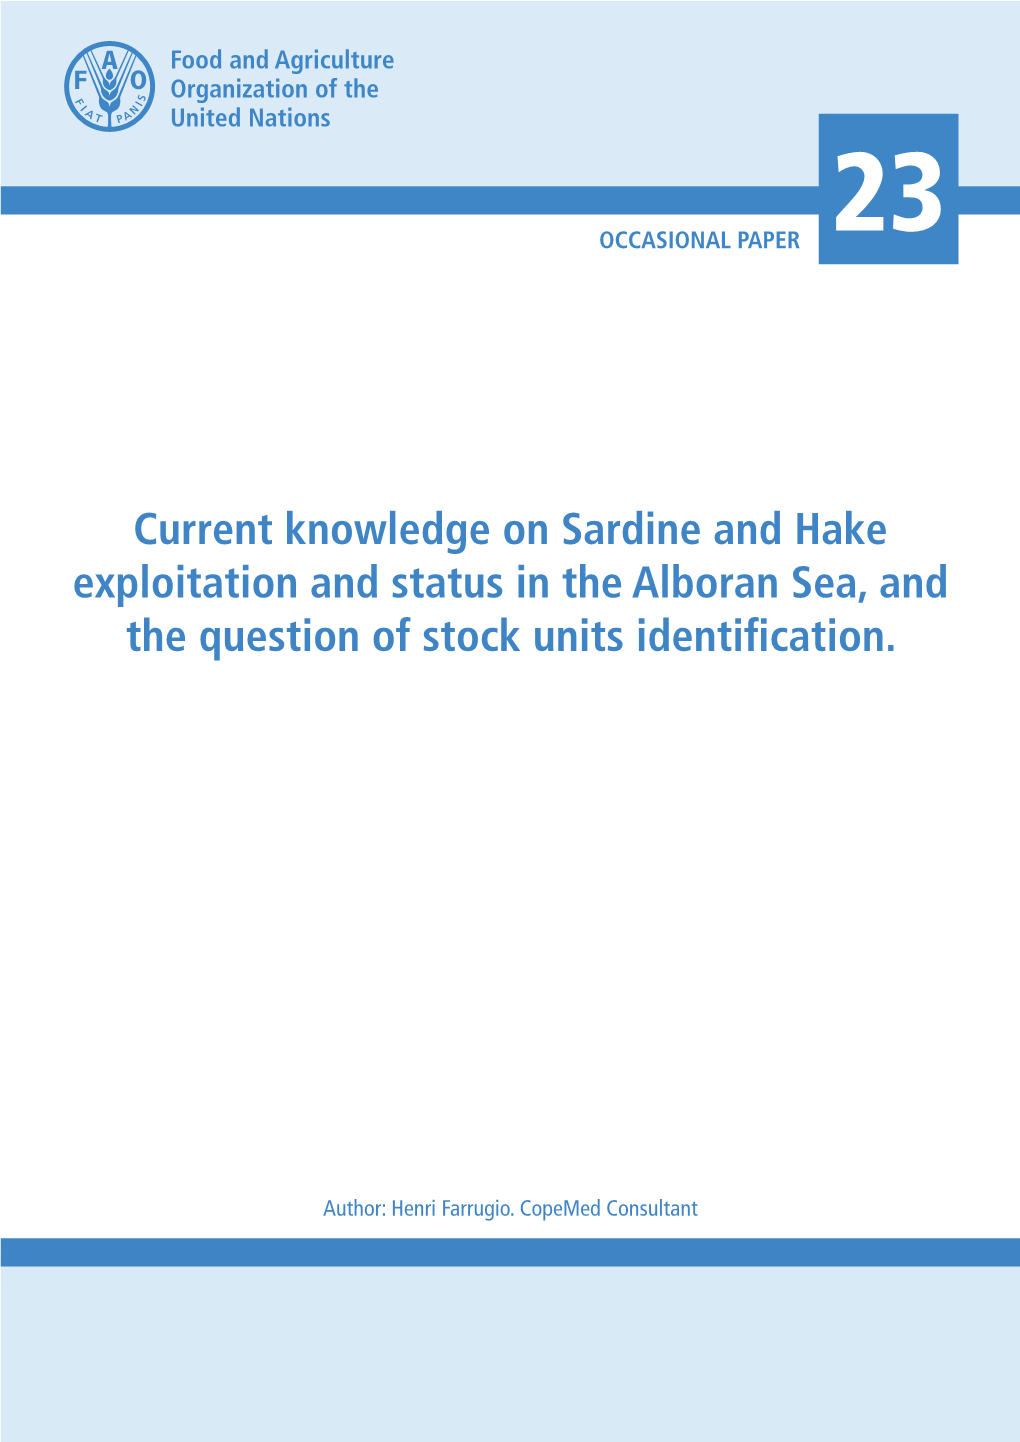 Current Knowledge on Sardine and Hake Exploitation and Status in the Alboran Sea, and the Question of Stock Units Identification